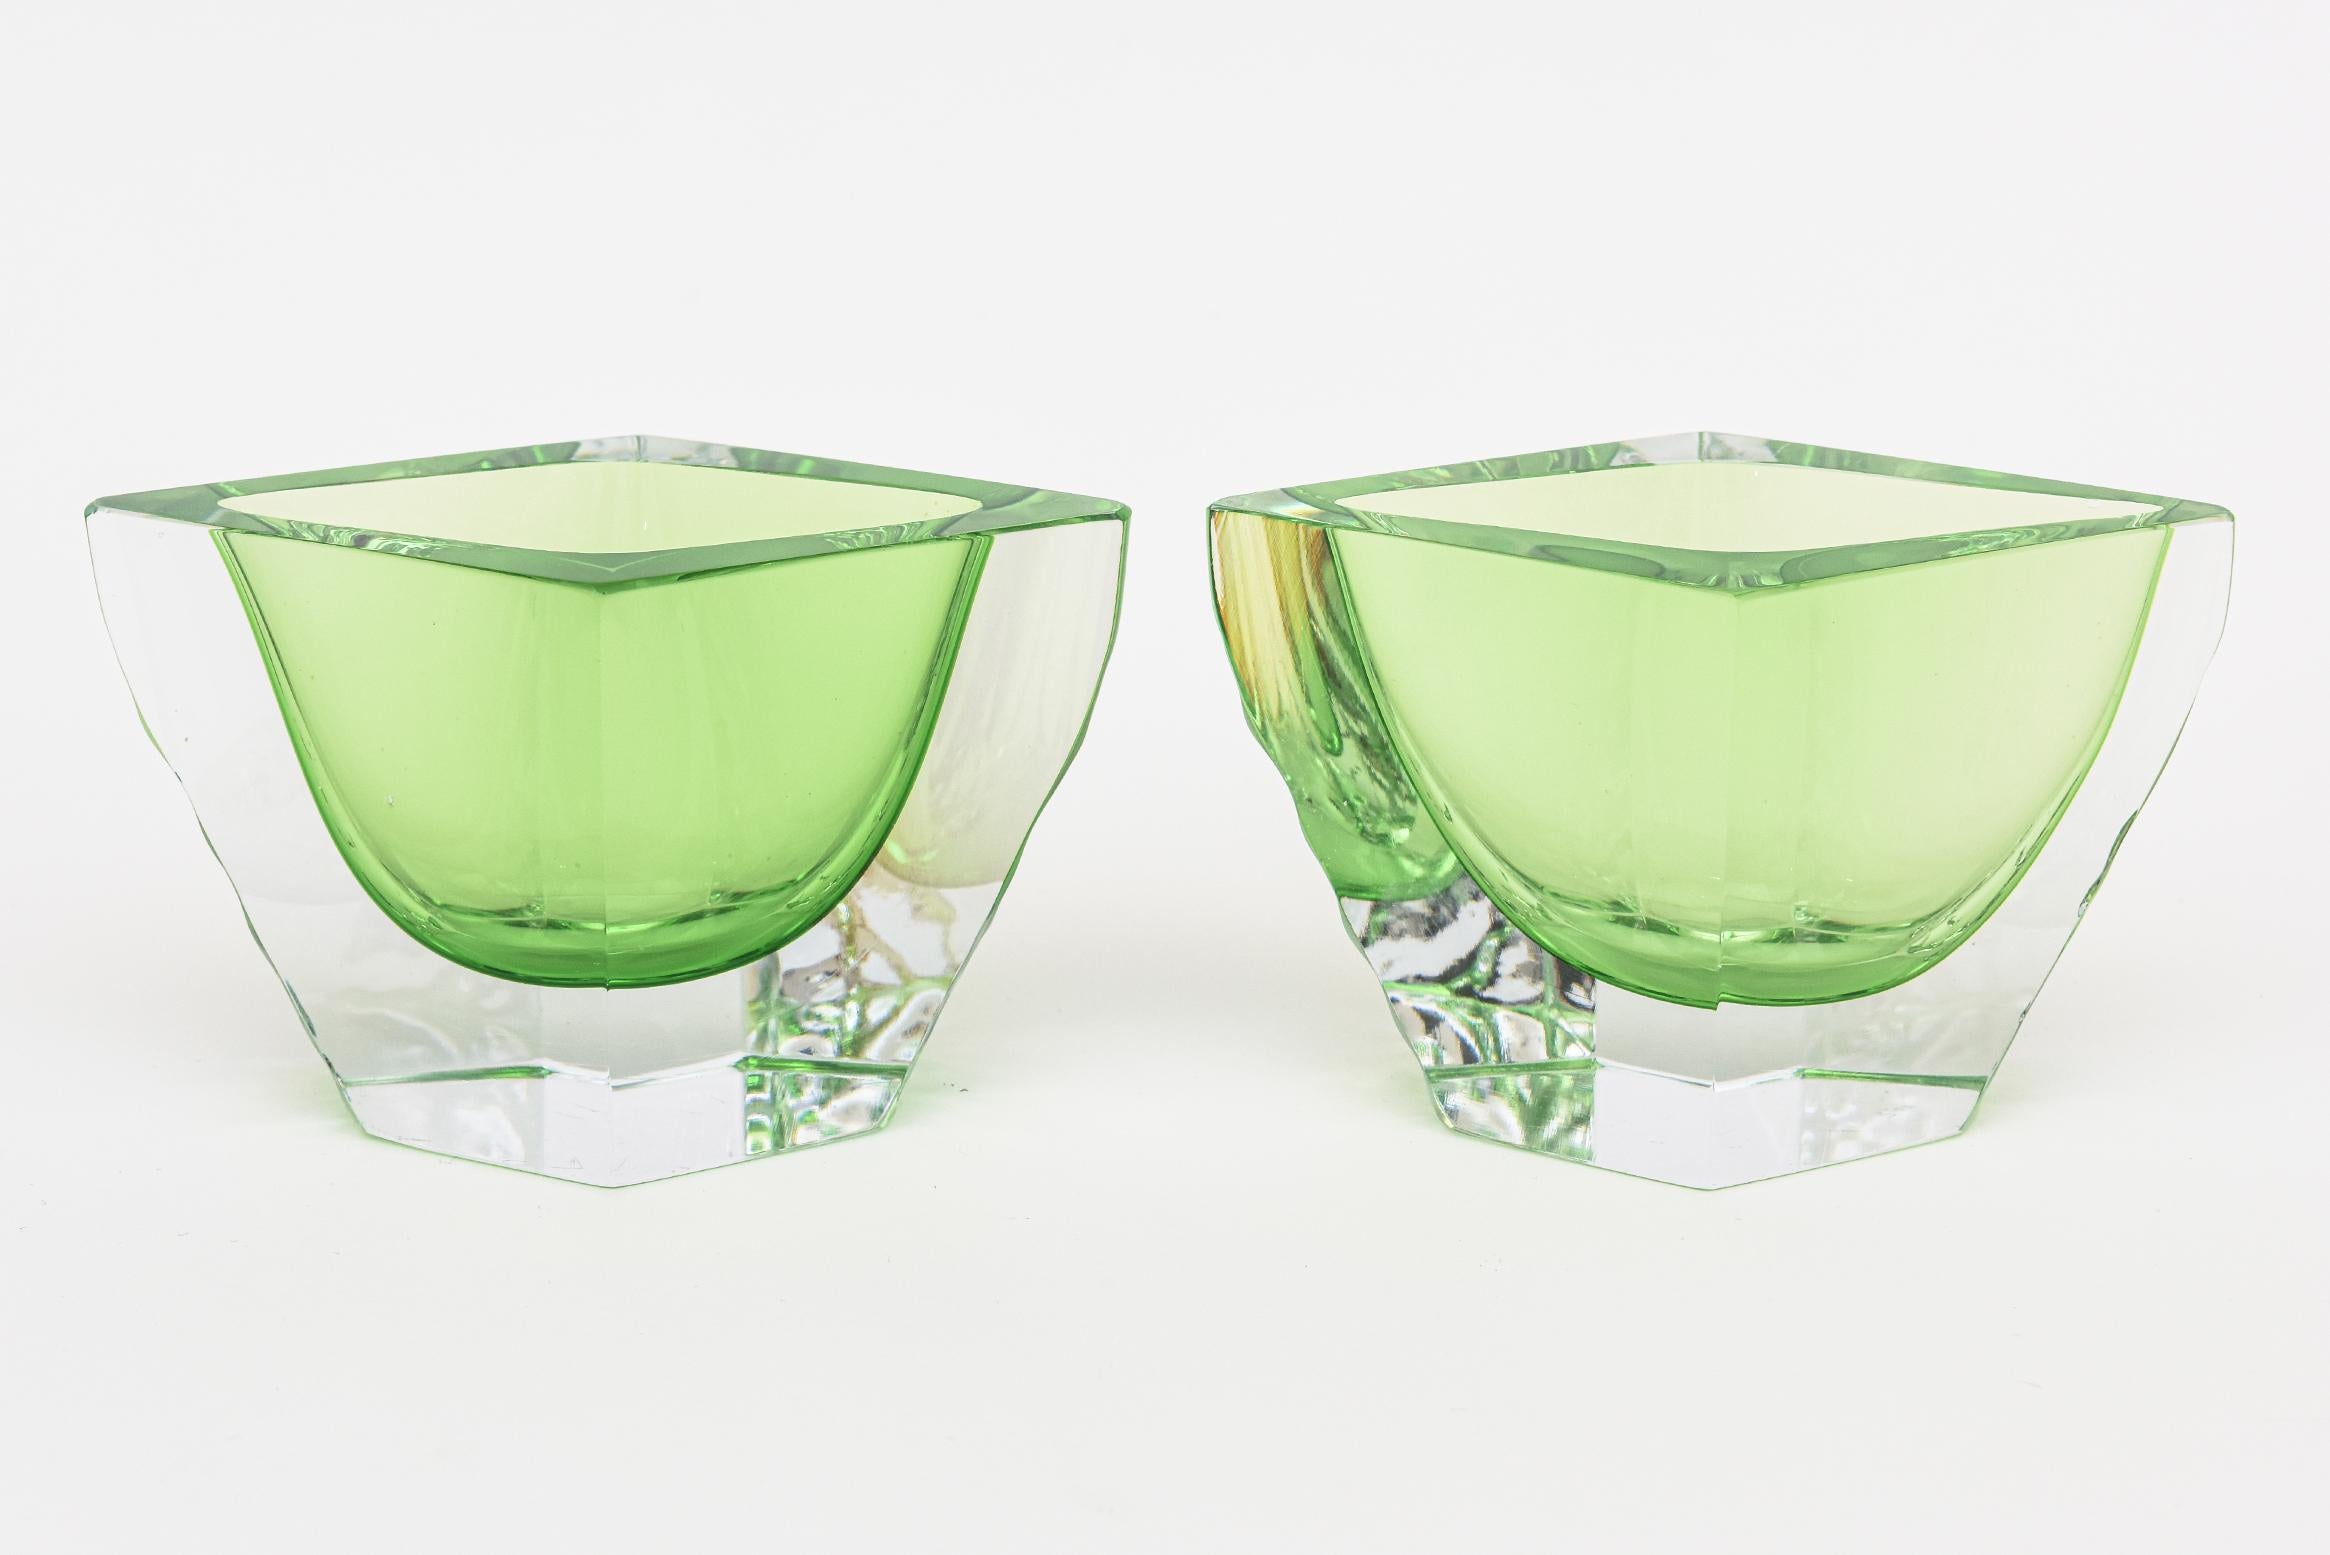 This pair of stunning jewel toned vintage Murano bowls are the most spectacular color of kelly green meets a lighter green with clear. They are by Alessandro Mandruzzato and are very unusual in their form. They are angled and have a flat cut